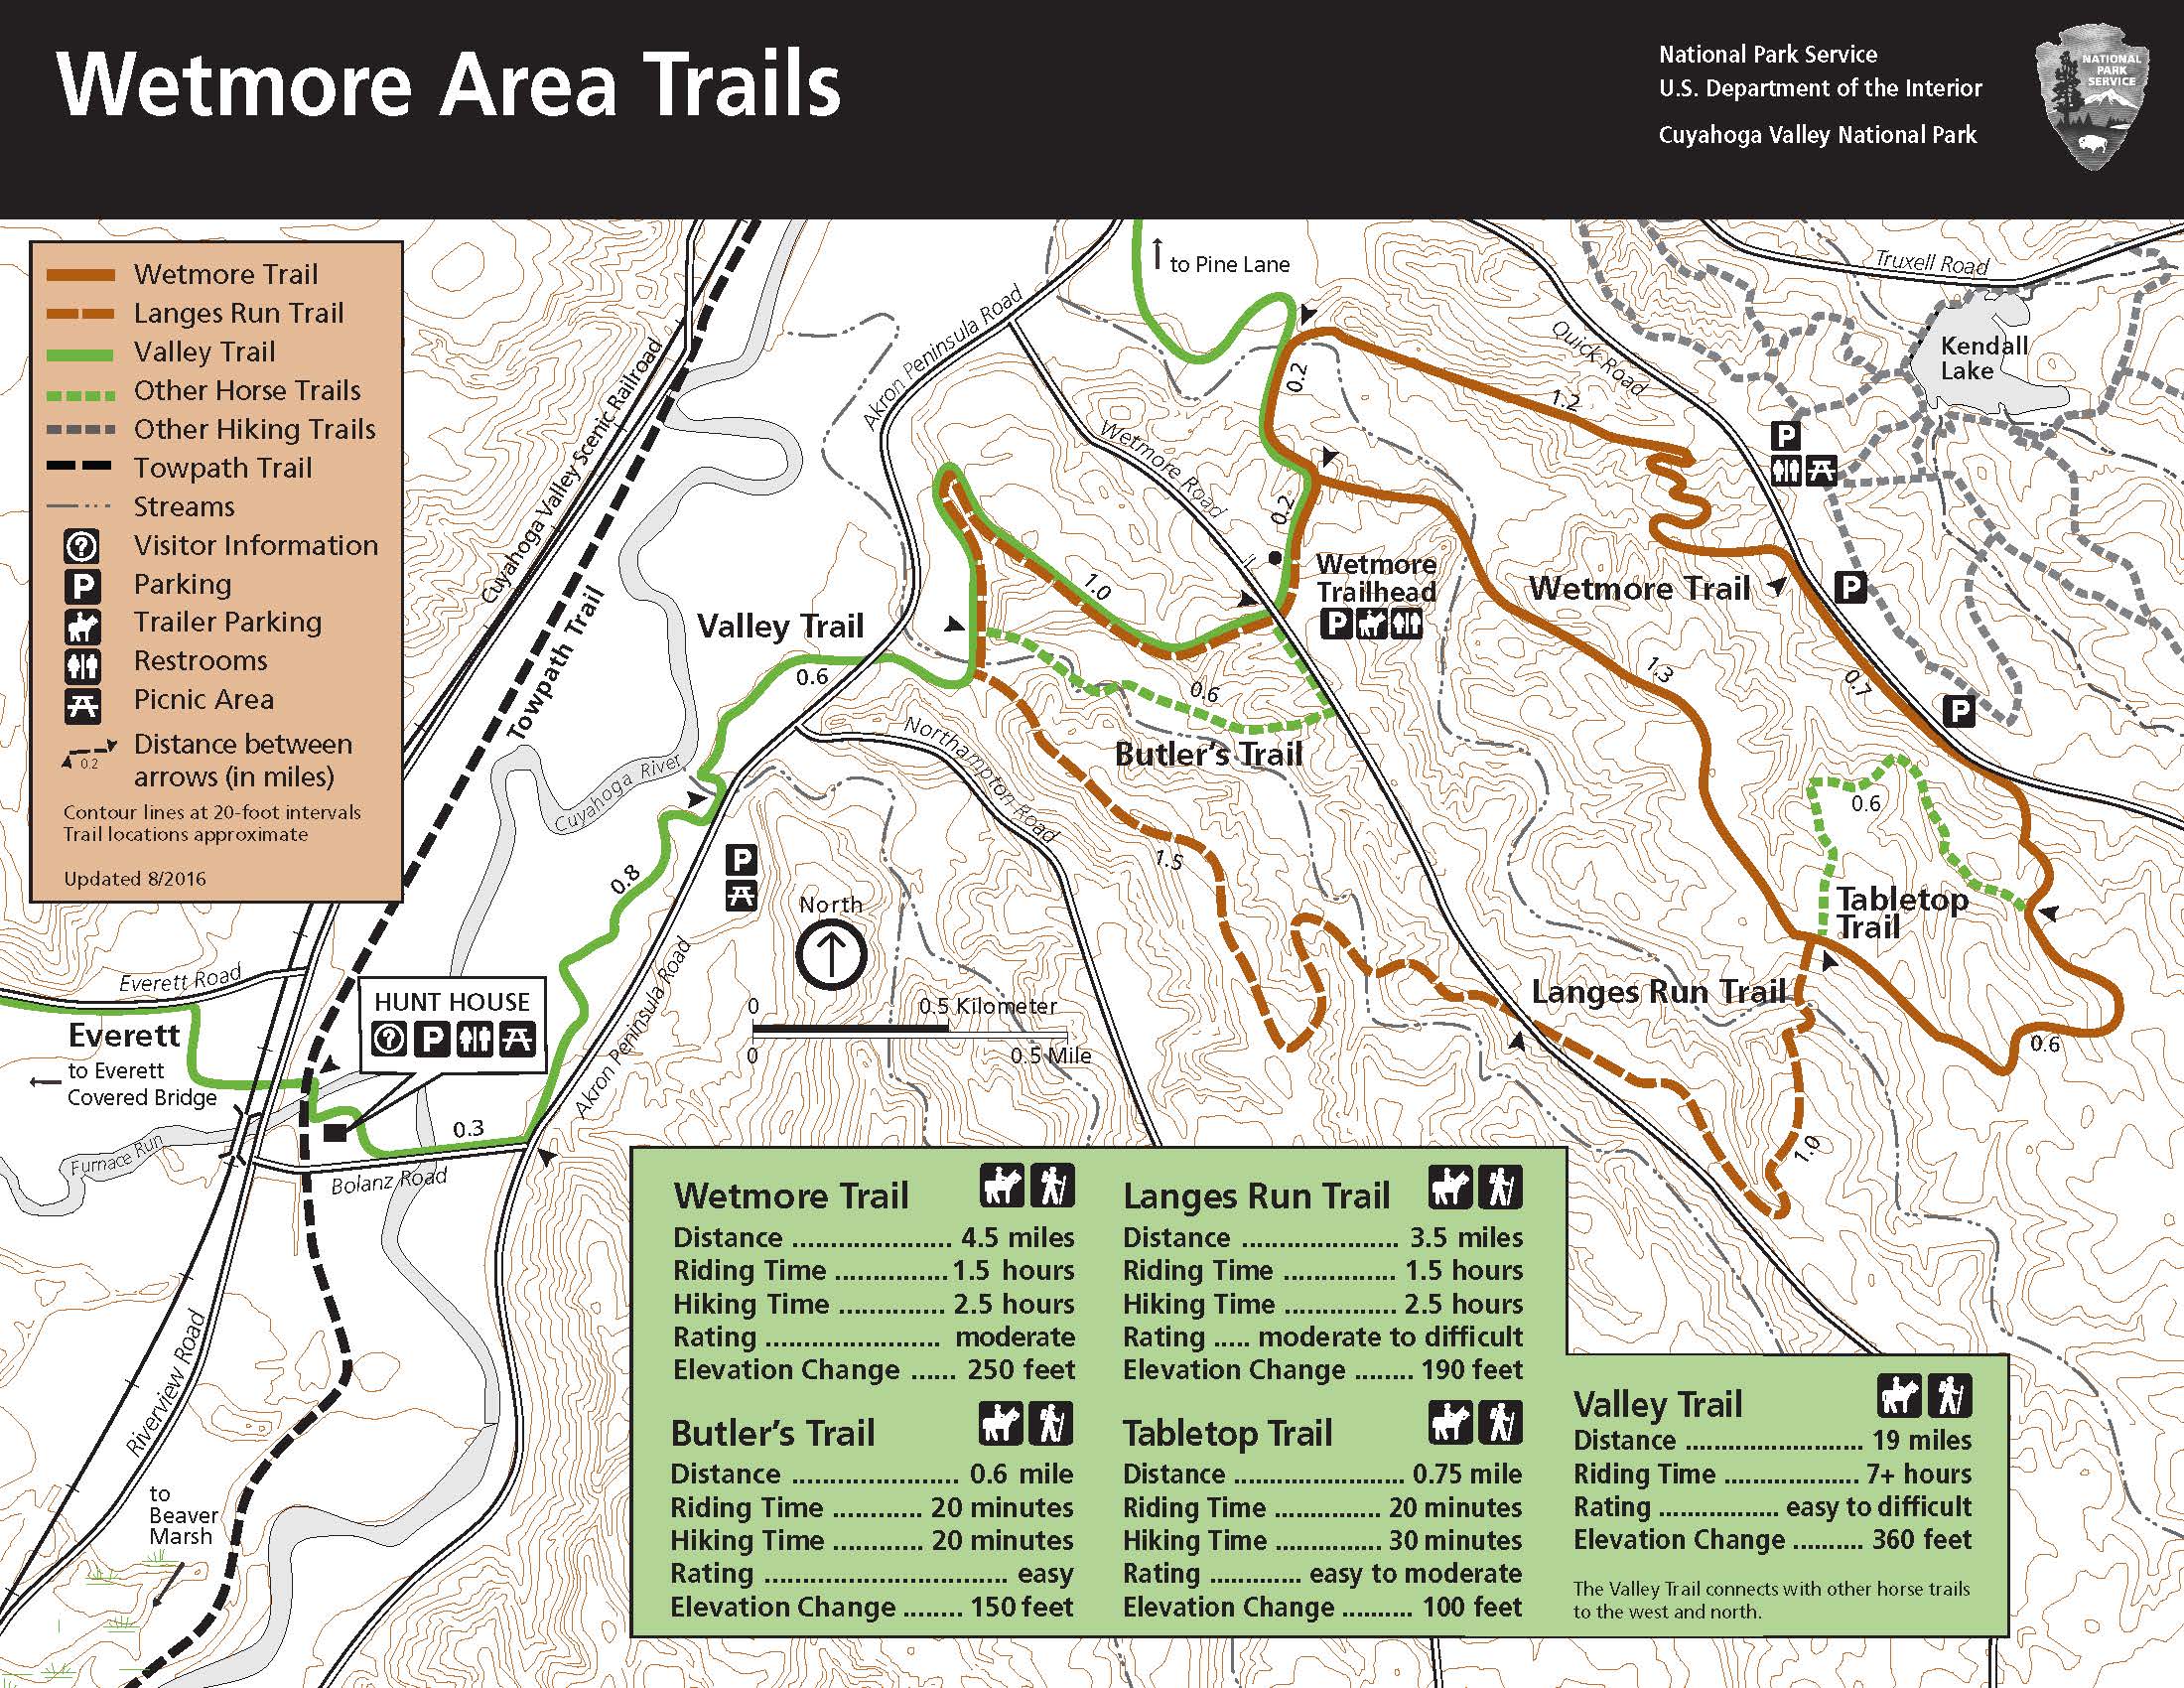 Map Of The Wetmore Area Trails. - Map of the Wetmore area trails.